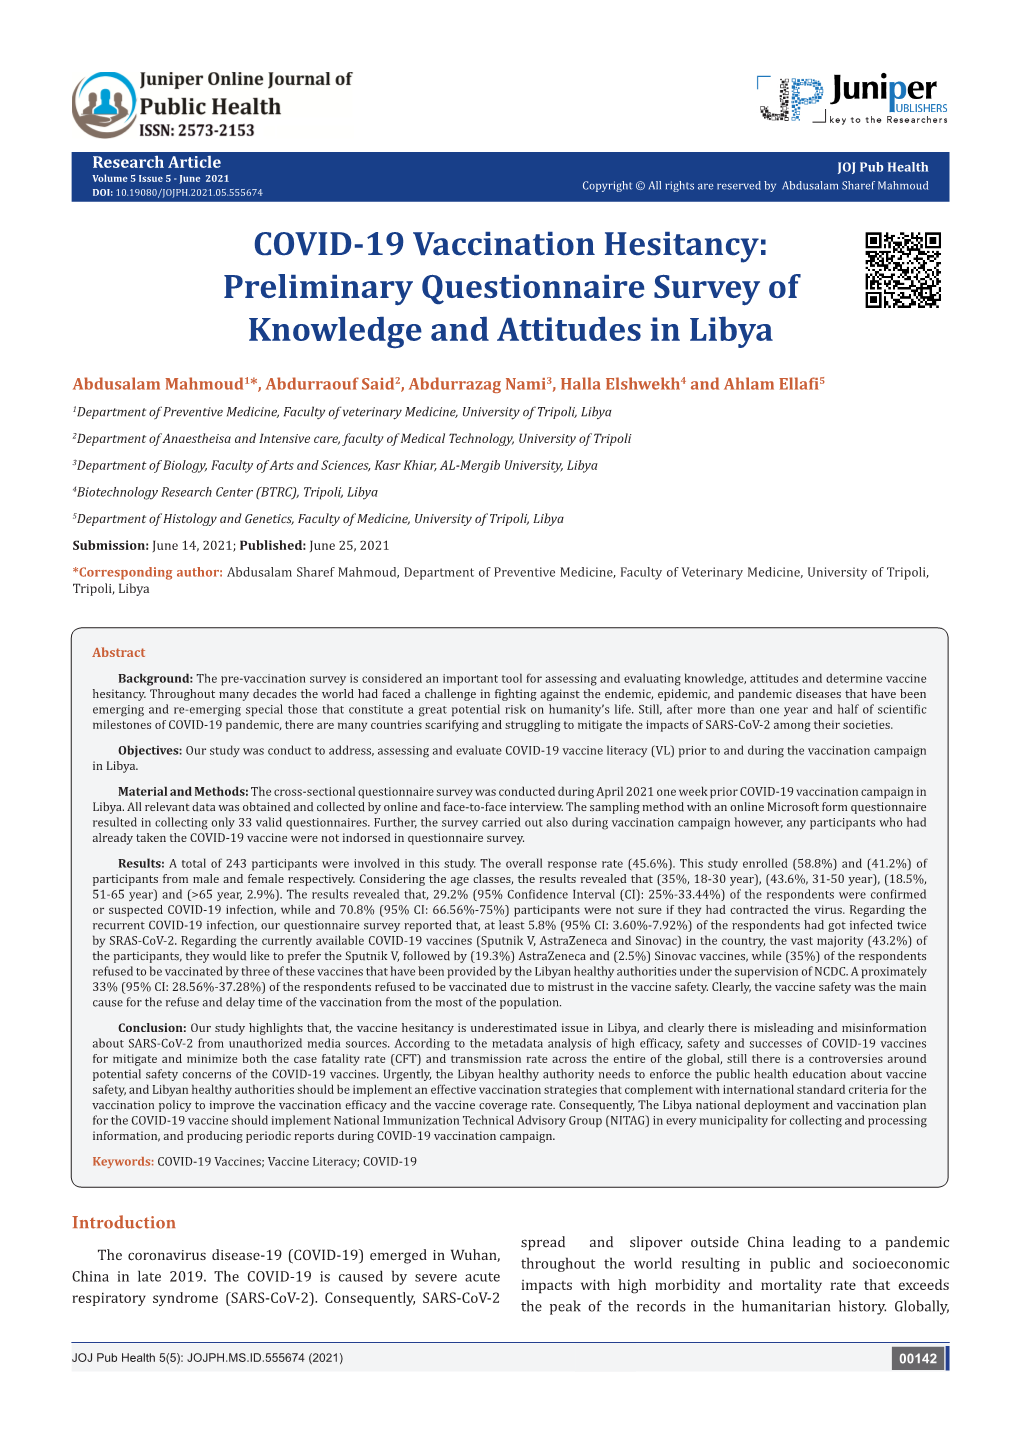 COVID-19 Vaccination Hesitancy: Preliminary Questionnaire Survey of Knowledge and Attitudes in Libya